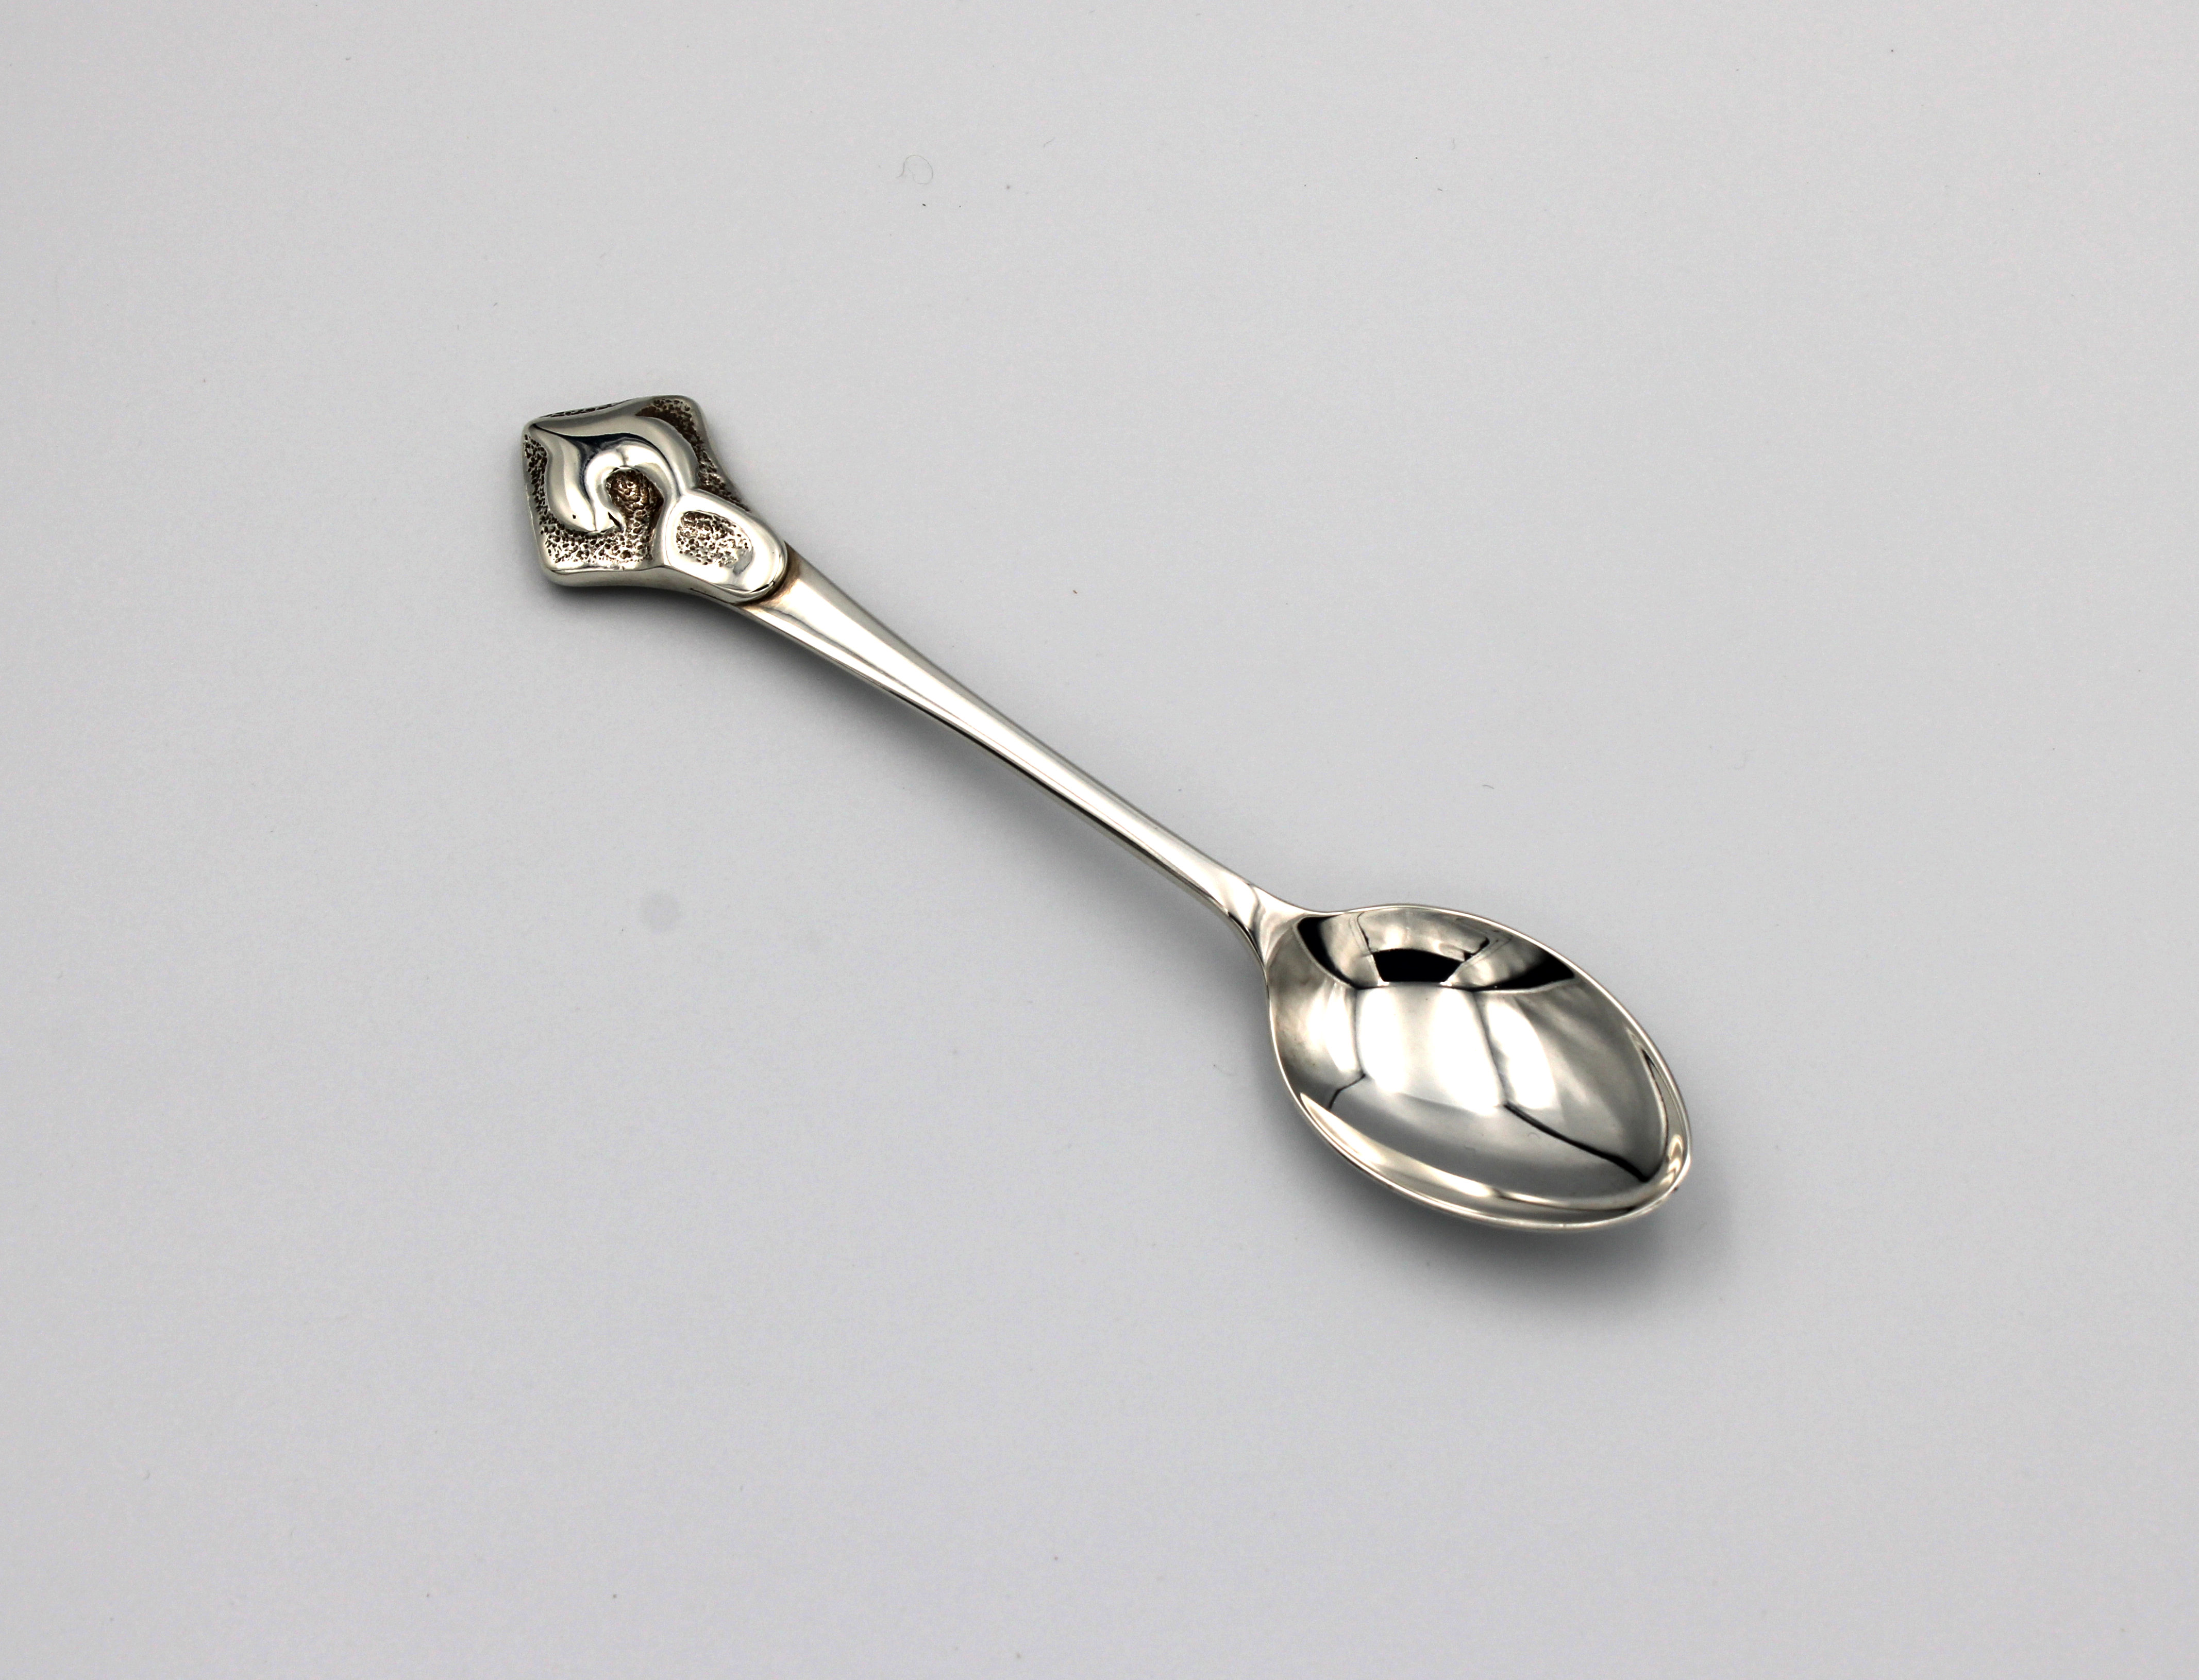 A heavy silver spoon with a decorative Art Nouveau style finial